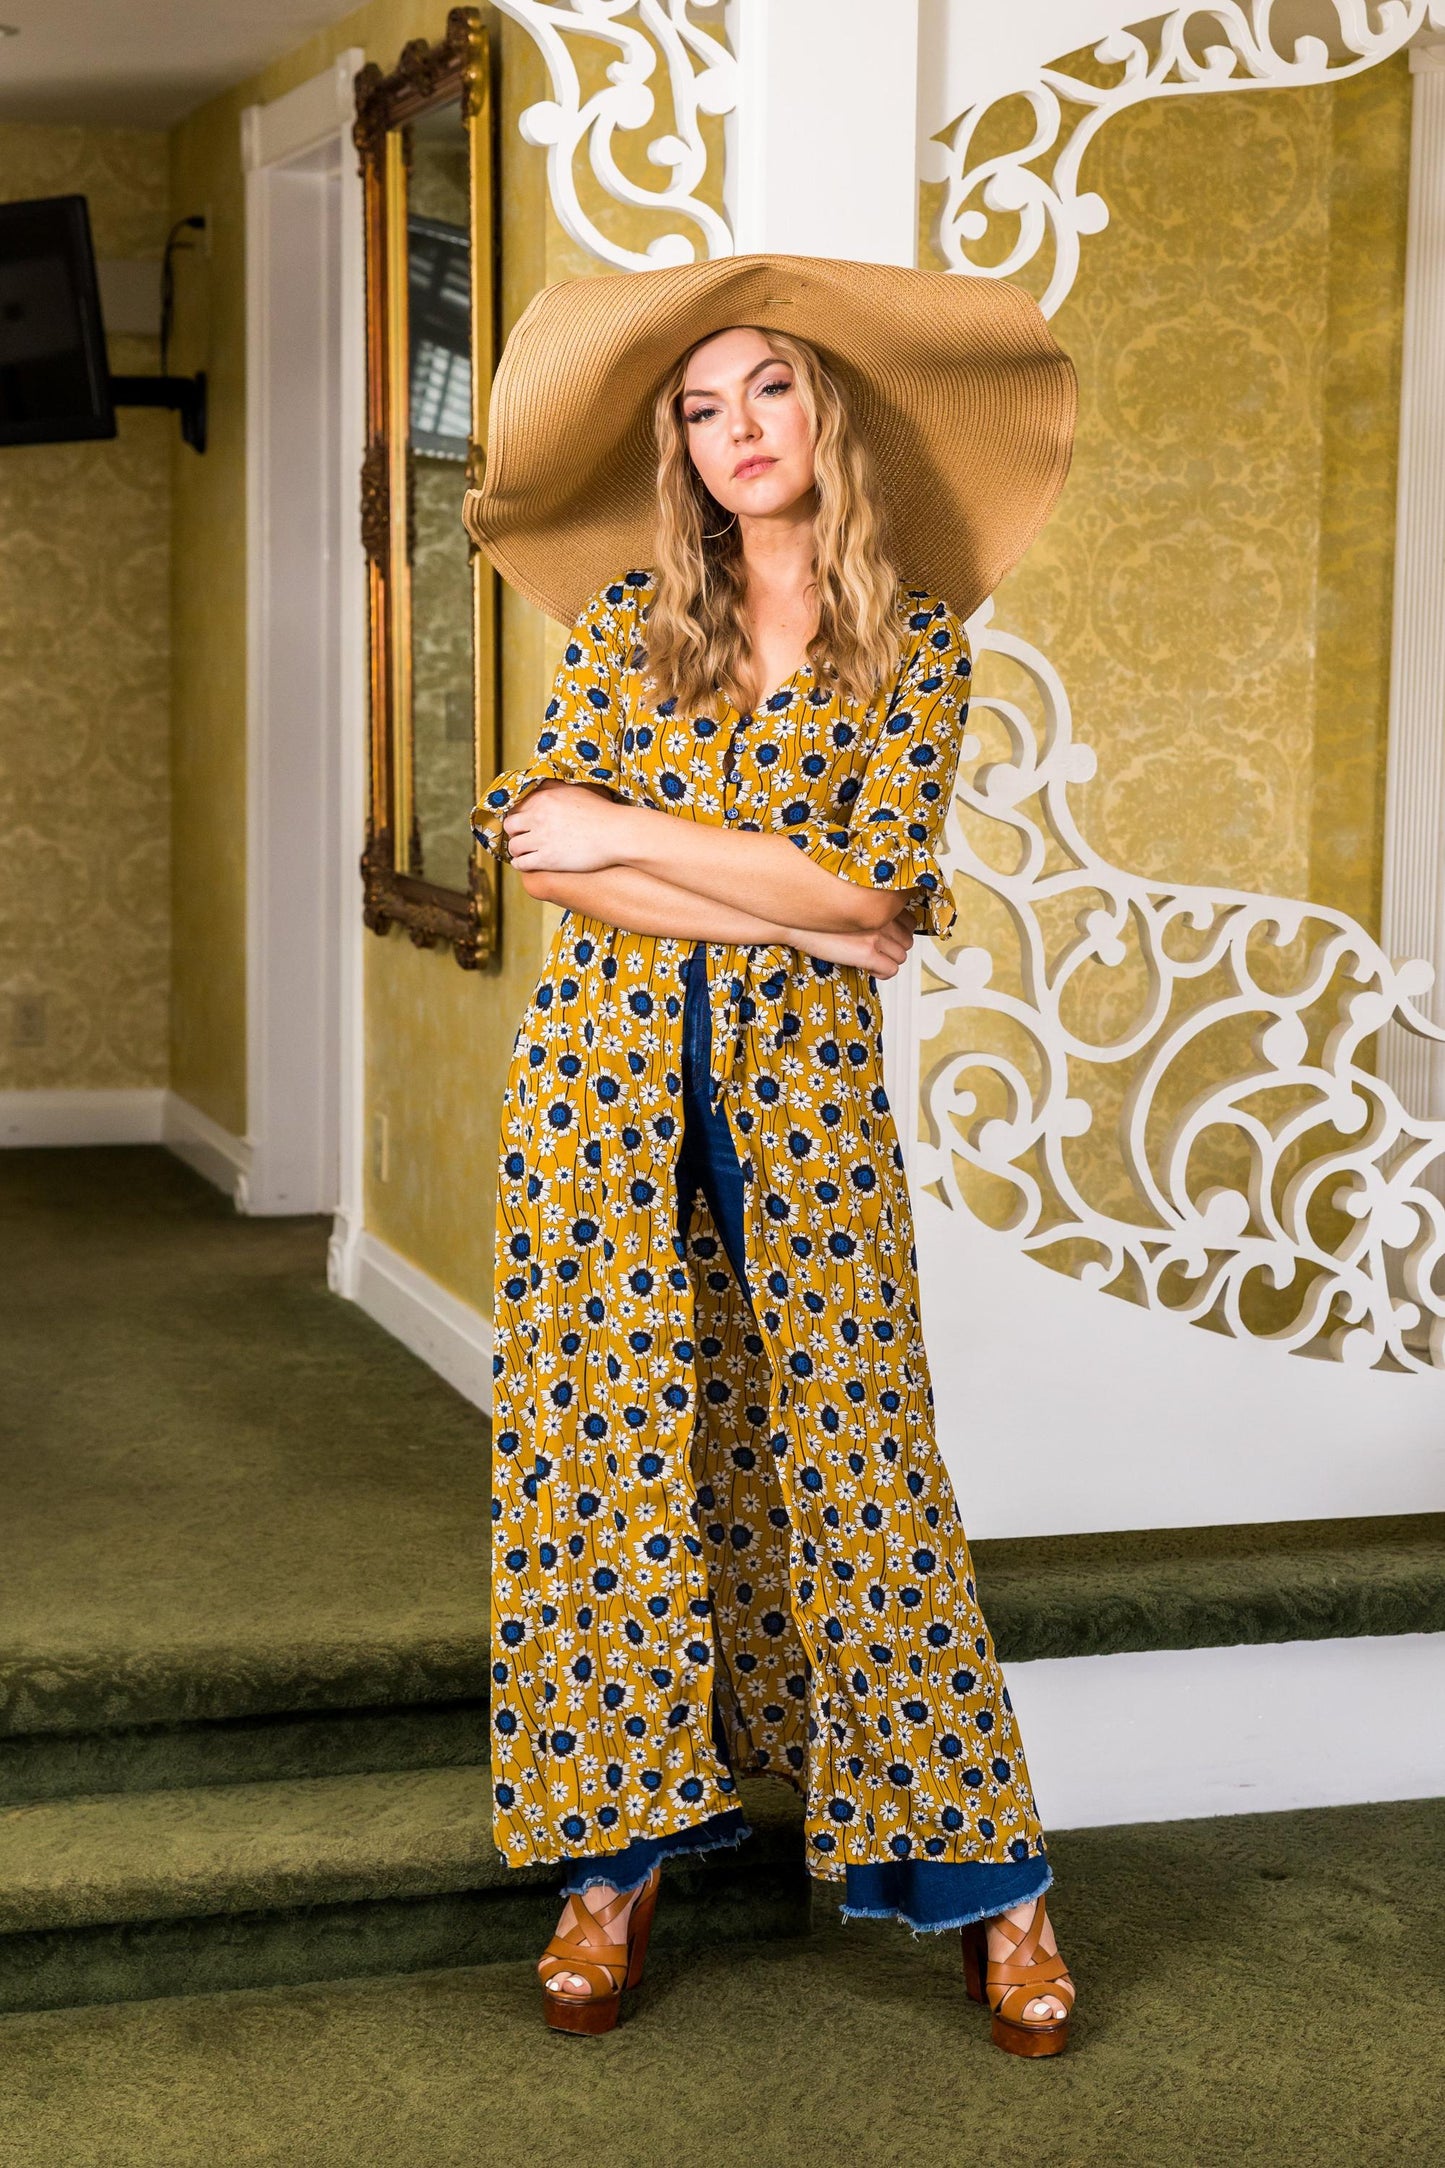 jennafer grace sunflower dressing gown coverup duster layering dress boho bohemian hippie romantic whimsical cottagecore beach resort holiday daisy floral yellow blue ruffle sleeve handmade